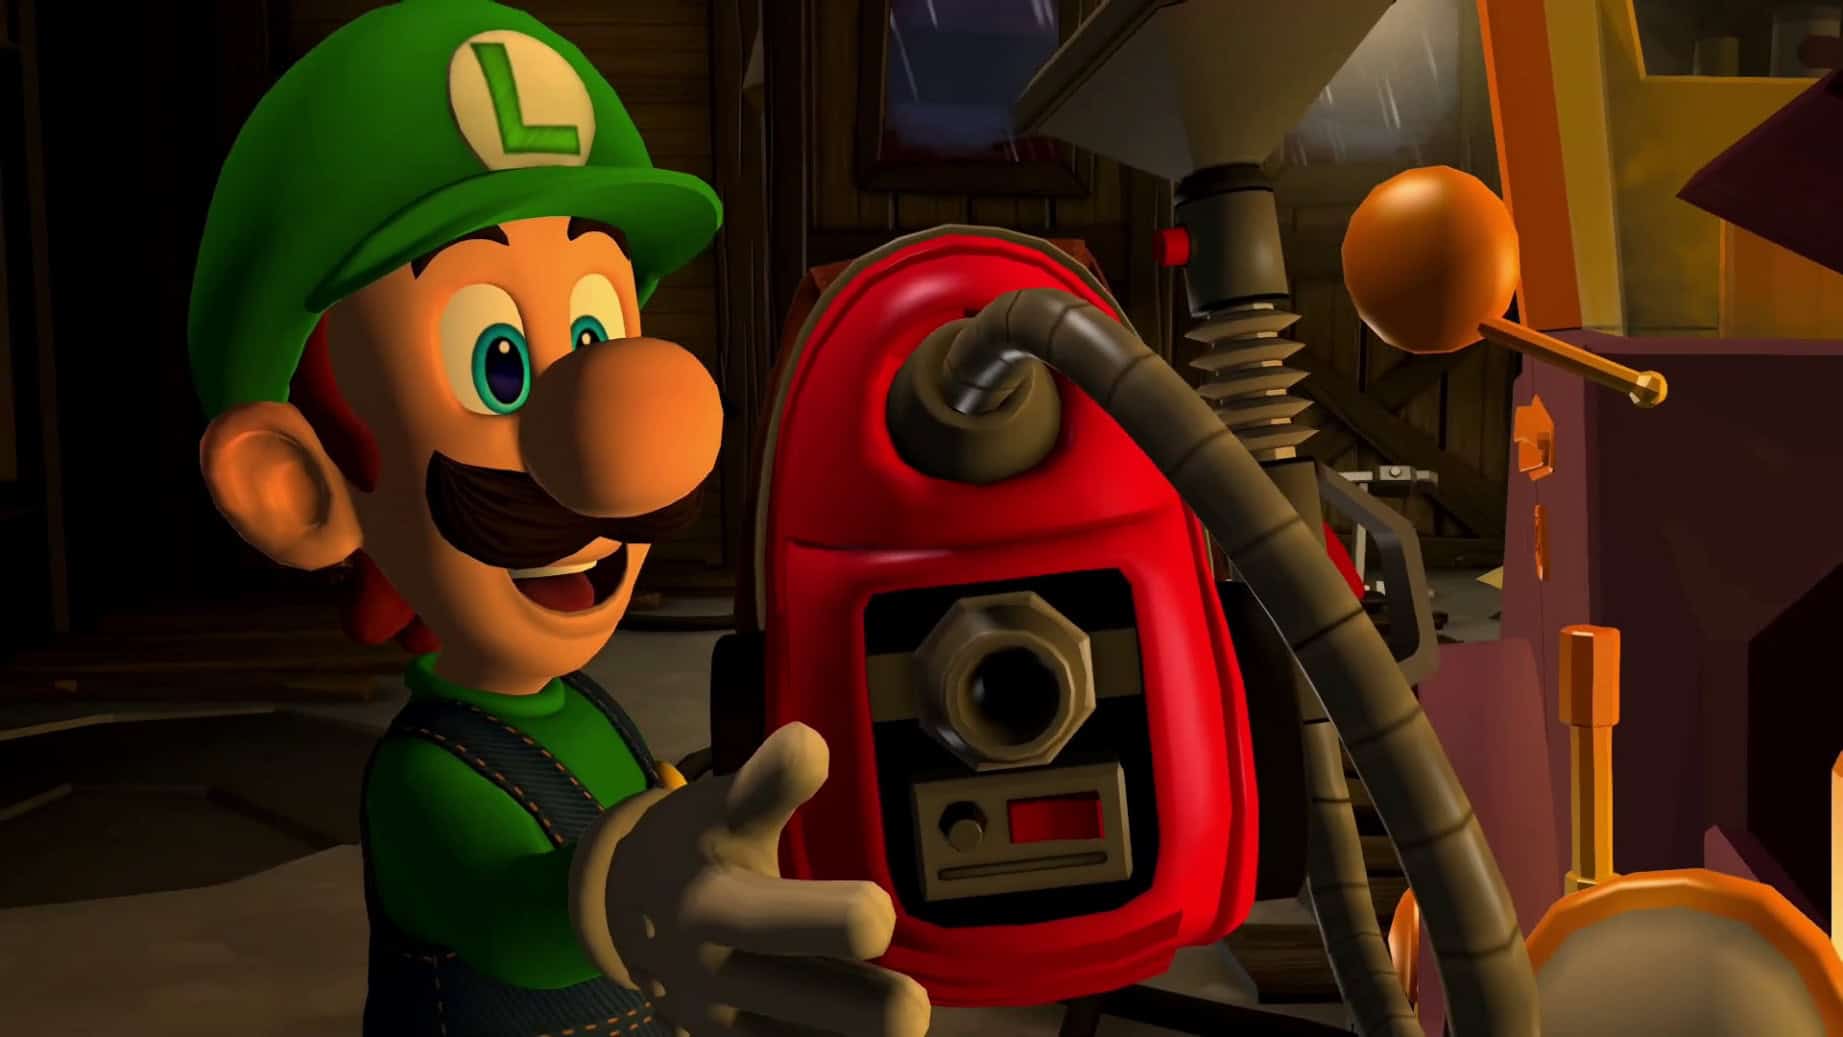 luigi's mansion 2 hd release date - luigi holds a red vacuum cleaner